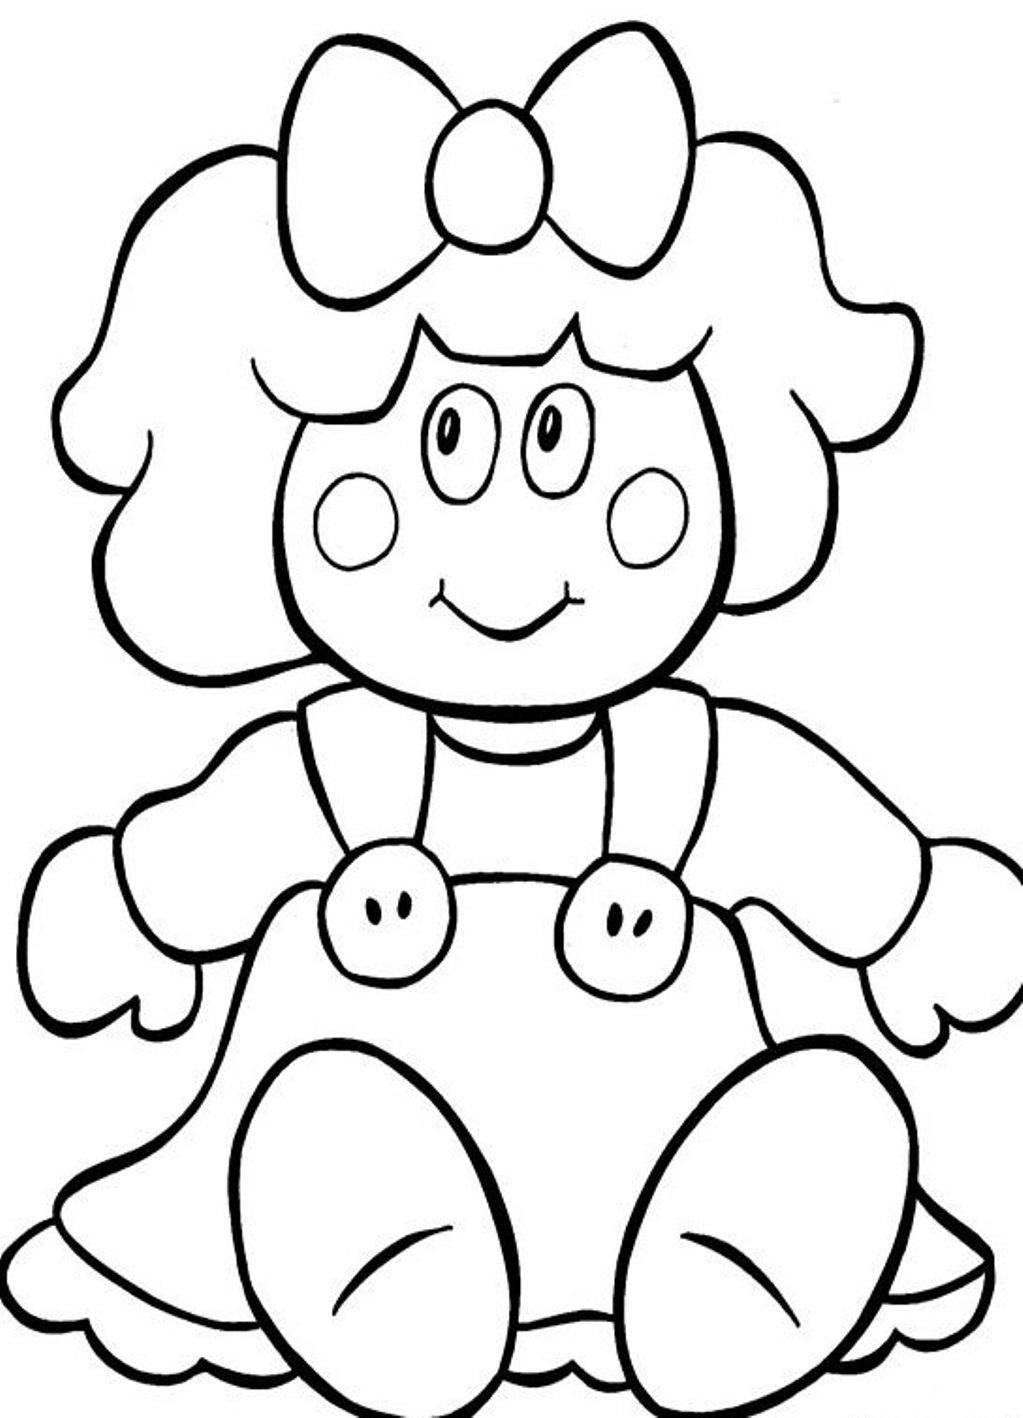 Doll coloring pages to download and print for free